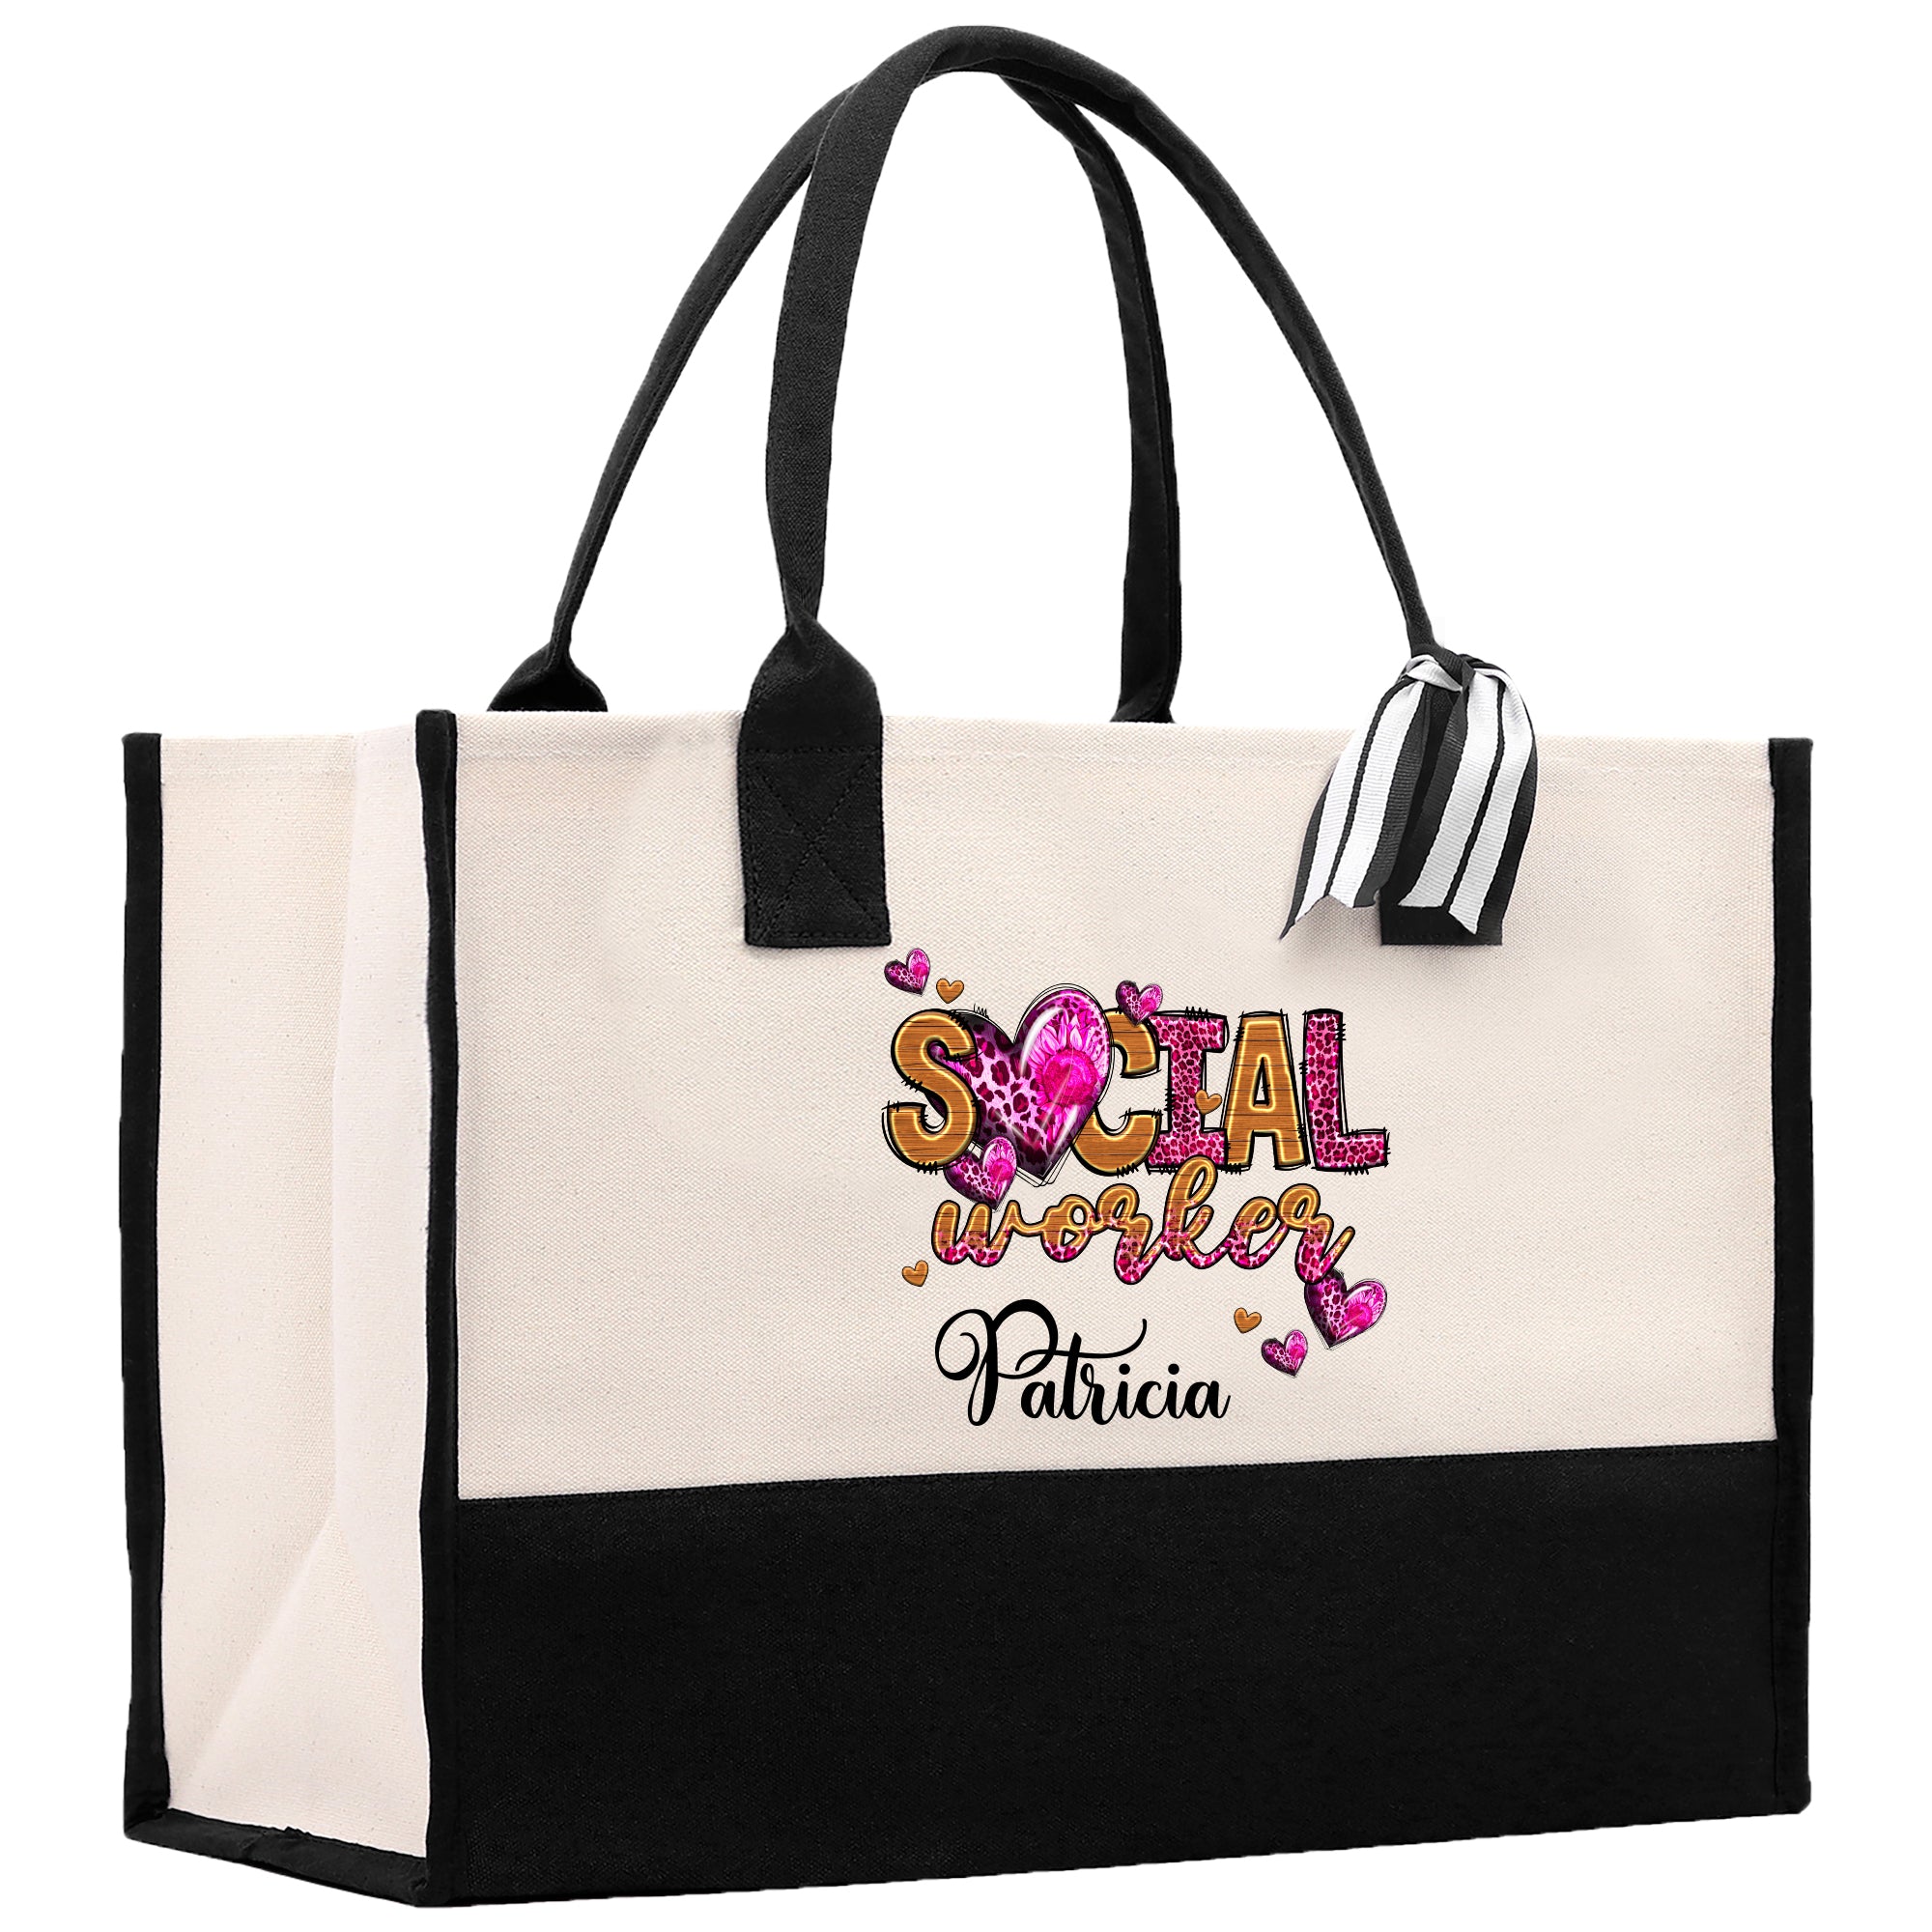 a black and white shopping bag with a floral design